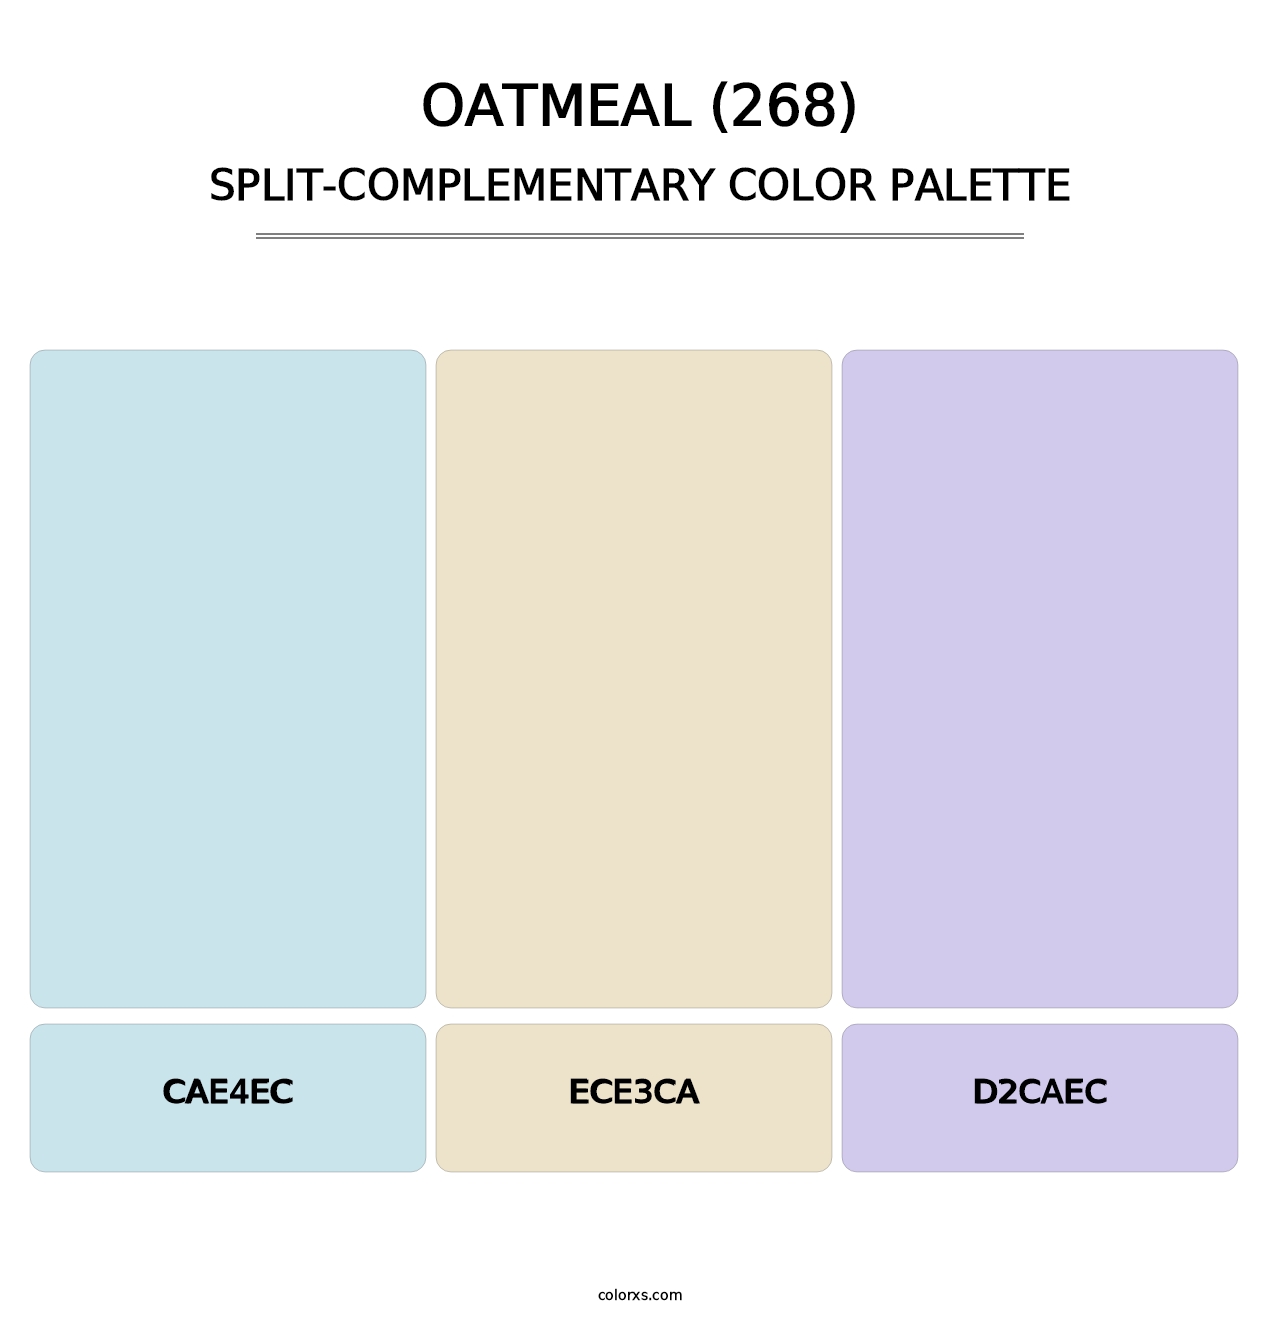 Oatmeal (268) - Split-Complementary Color Palette